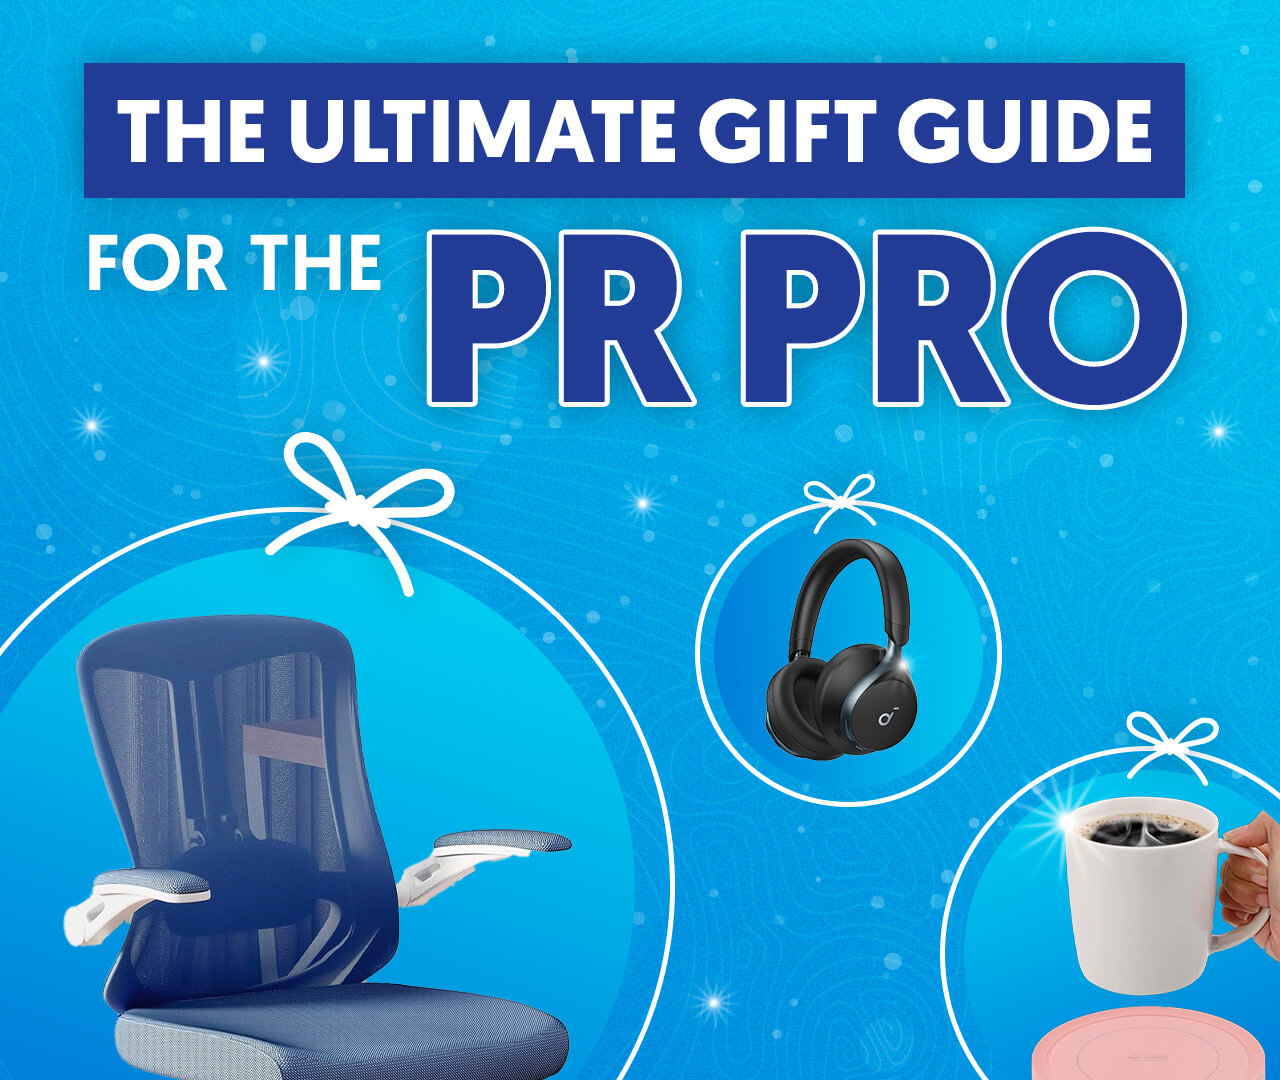 Pitch-Perfect Presents: The Ultimate Holiday Gift Guide for the PR Pro